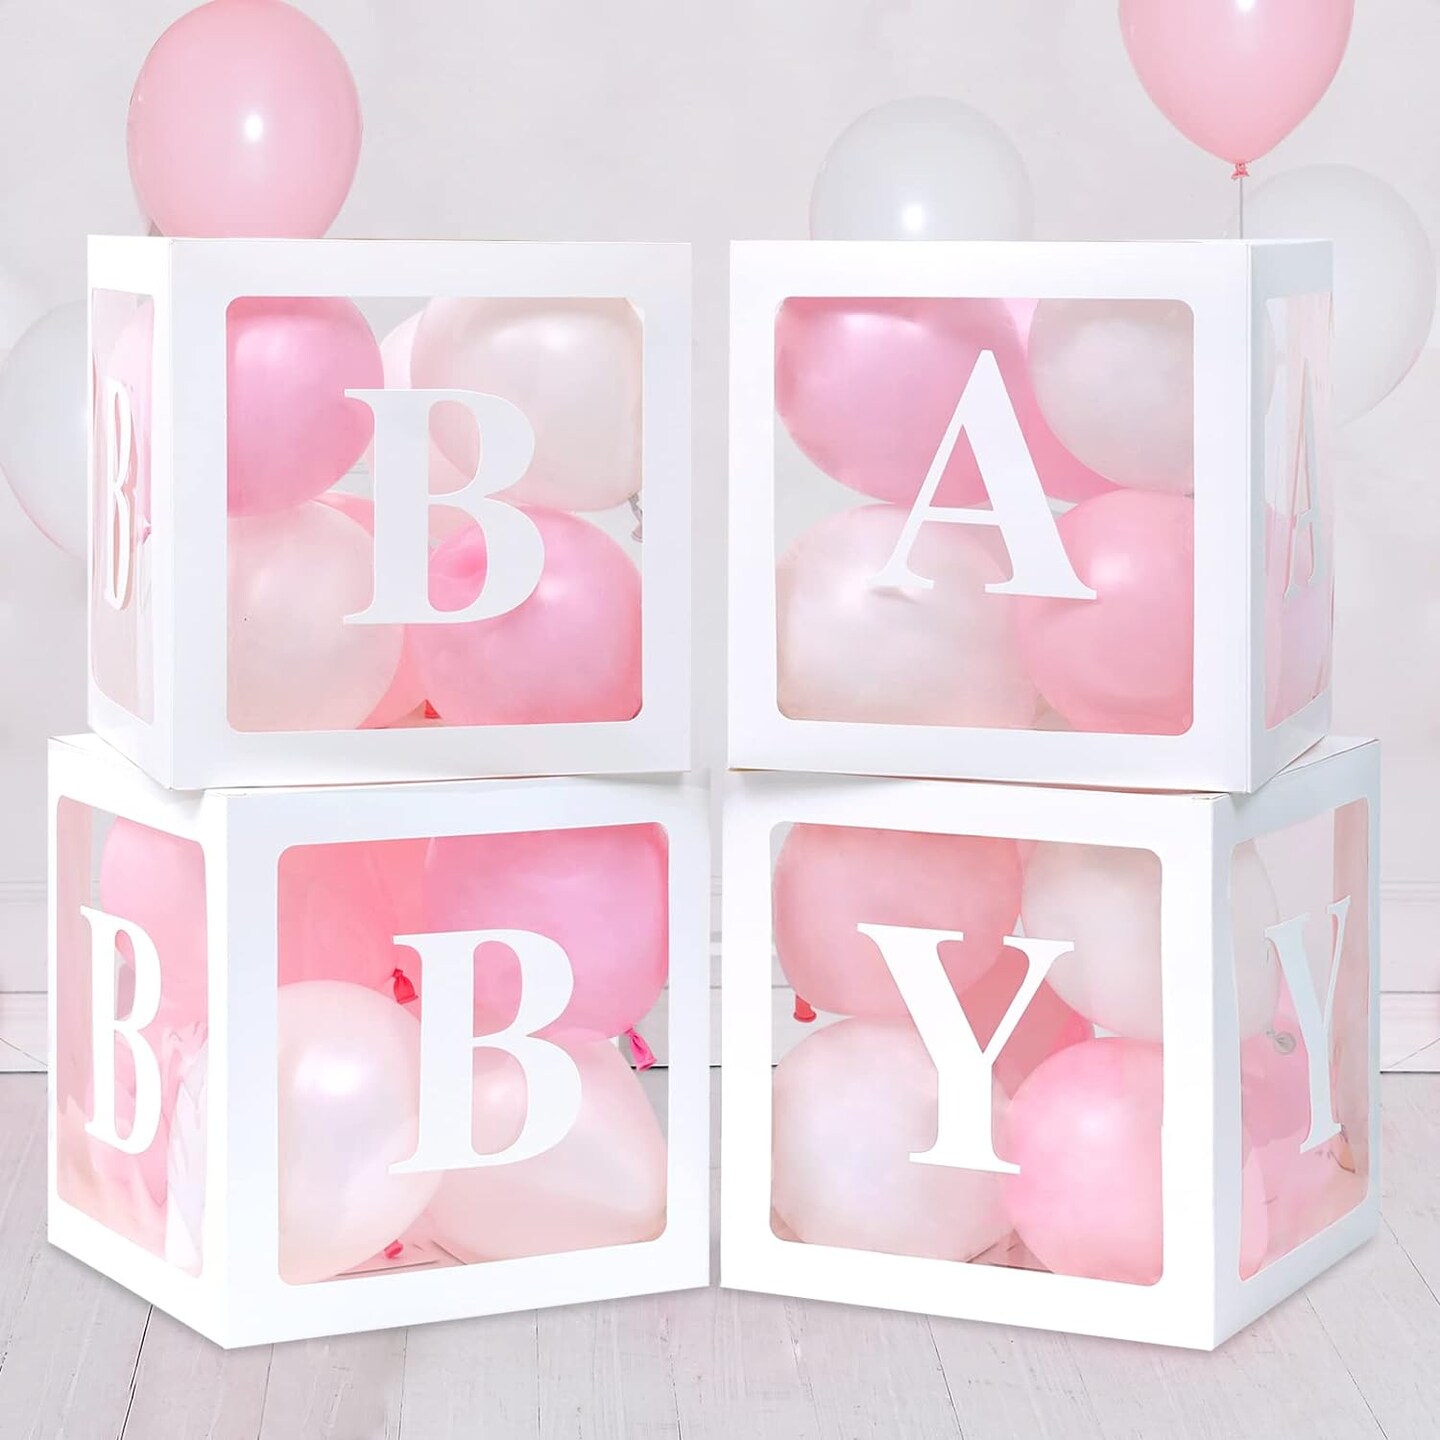 Baby Boxes for Baby Shower Decoration with 8 Letters and 36 Balloons 4pcs Clear Balloon Boxes BABY Blocks for Girls Birthday Party Decorations(Pink)